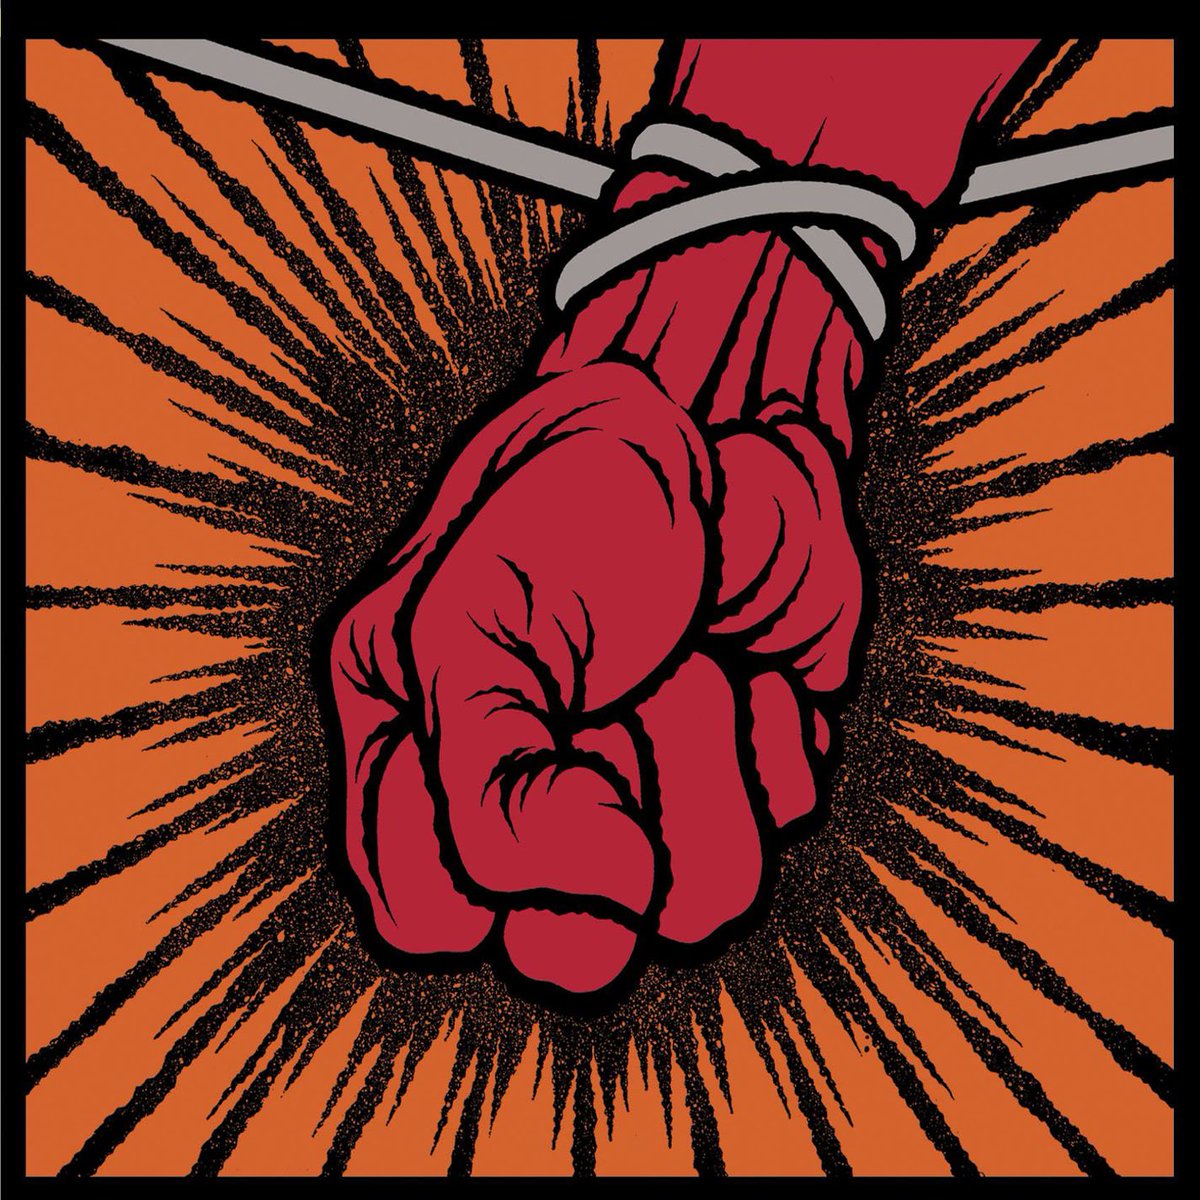 On this day in 2003, @Metallica released their eighth studio album, St. Anger on @elektrarecords

Reached number 3 in the UK album charts, it is regarded by fans as their worst album, although I like it myself personally.  It was the last album they released on the label.